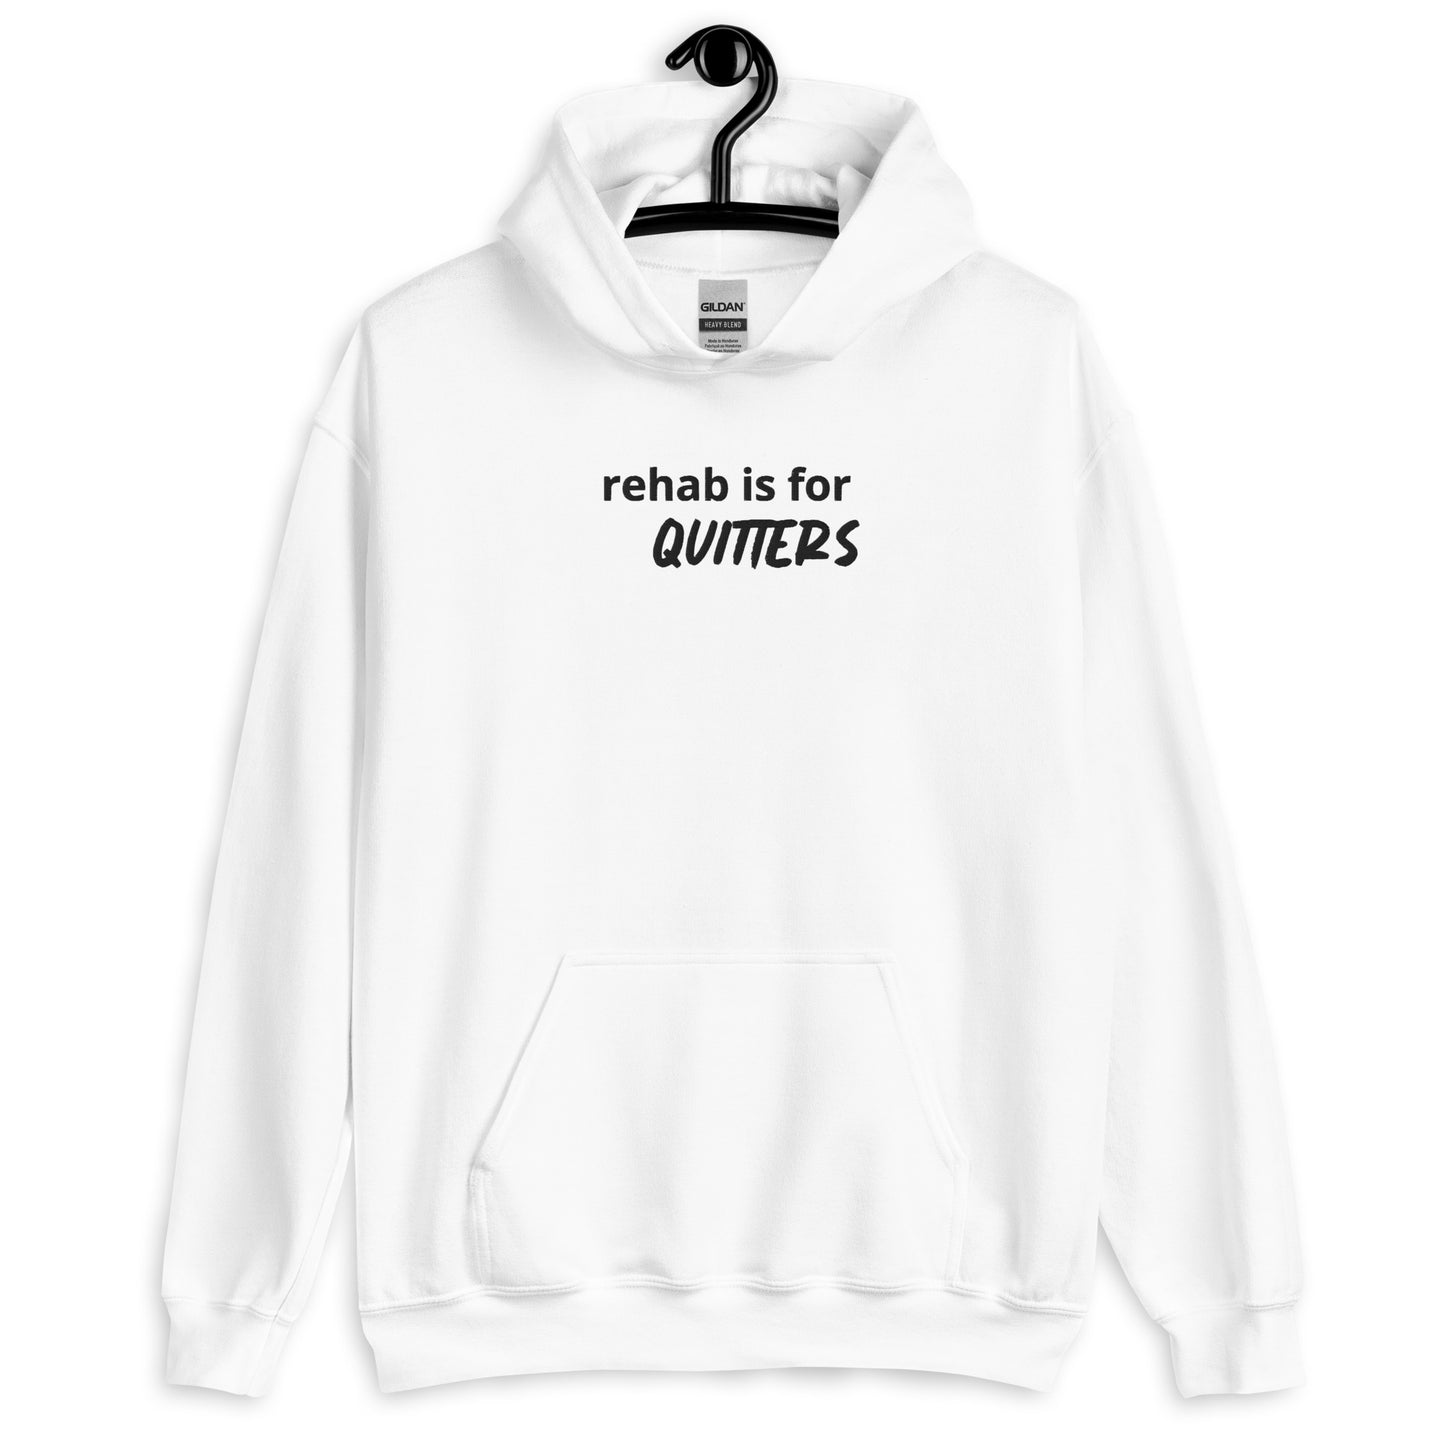 rehab is for quitters Hoodie